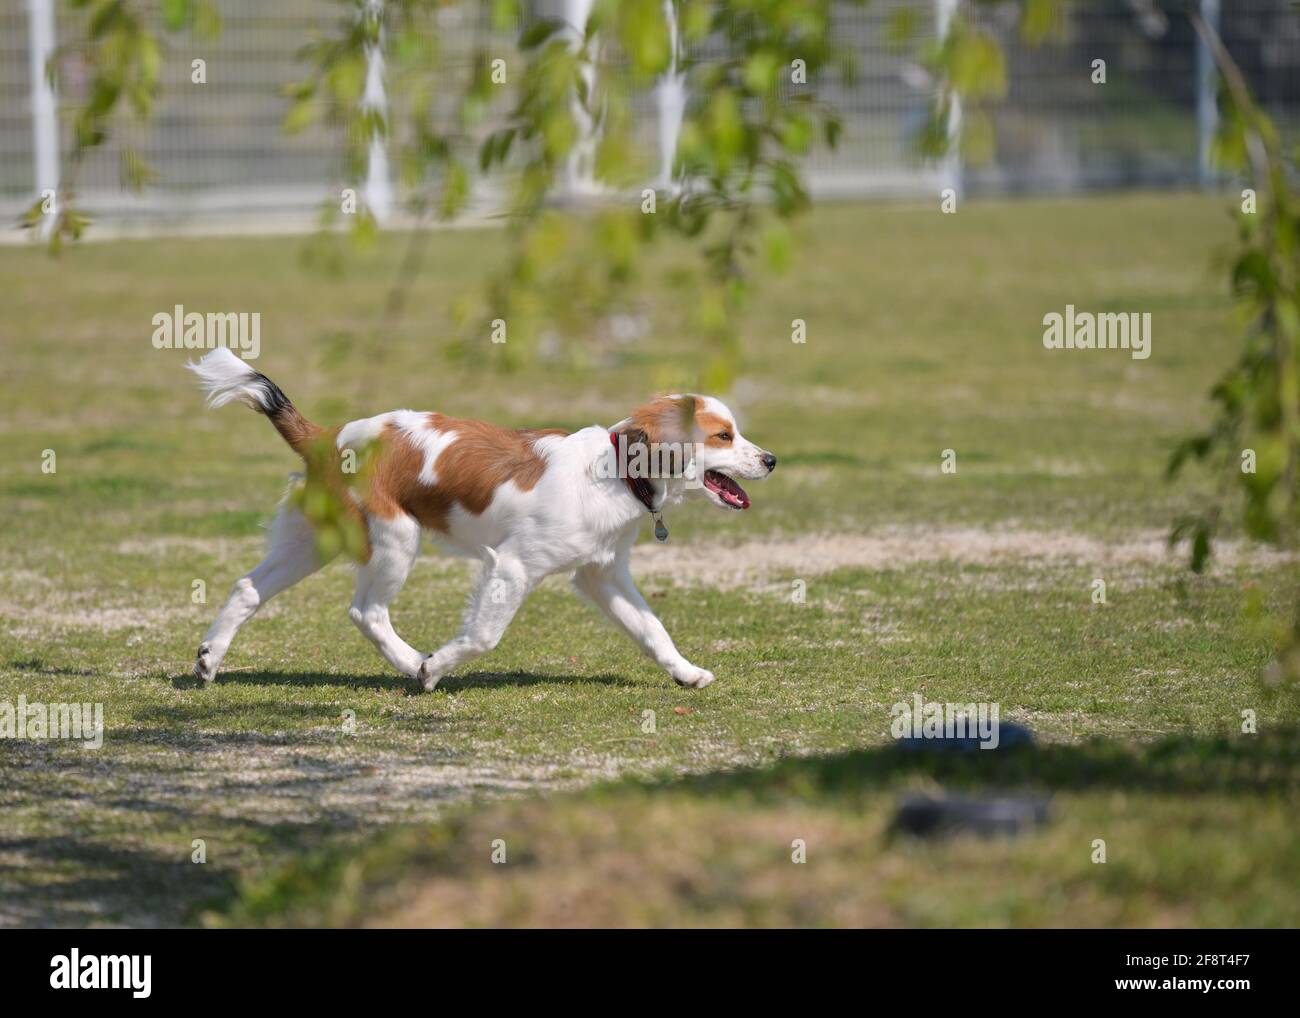 Happy young purebred dog kooiker walking on the grass with his tongue out. Tree branches and green leaves in the foreground. Stock Photo